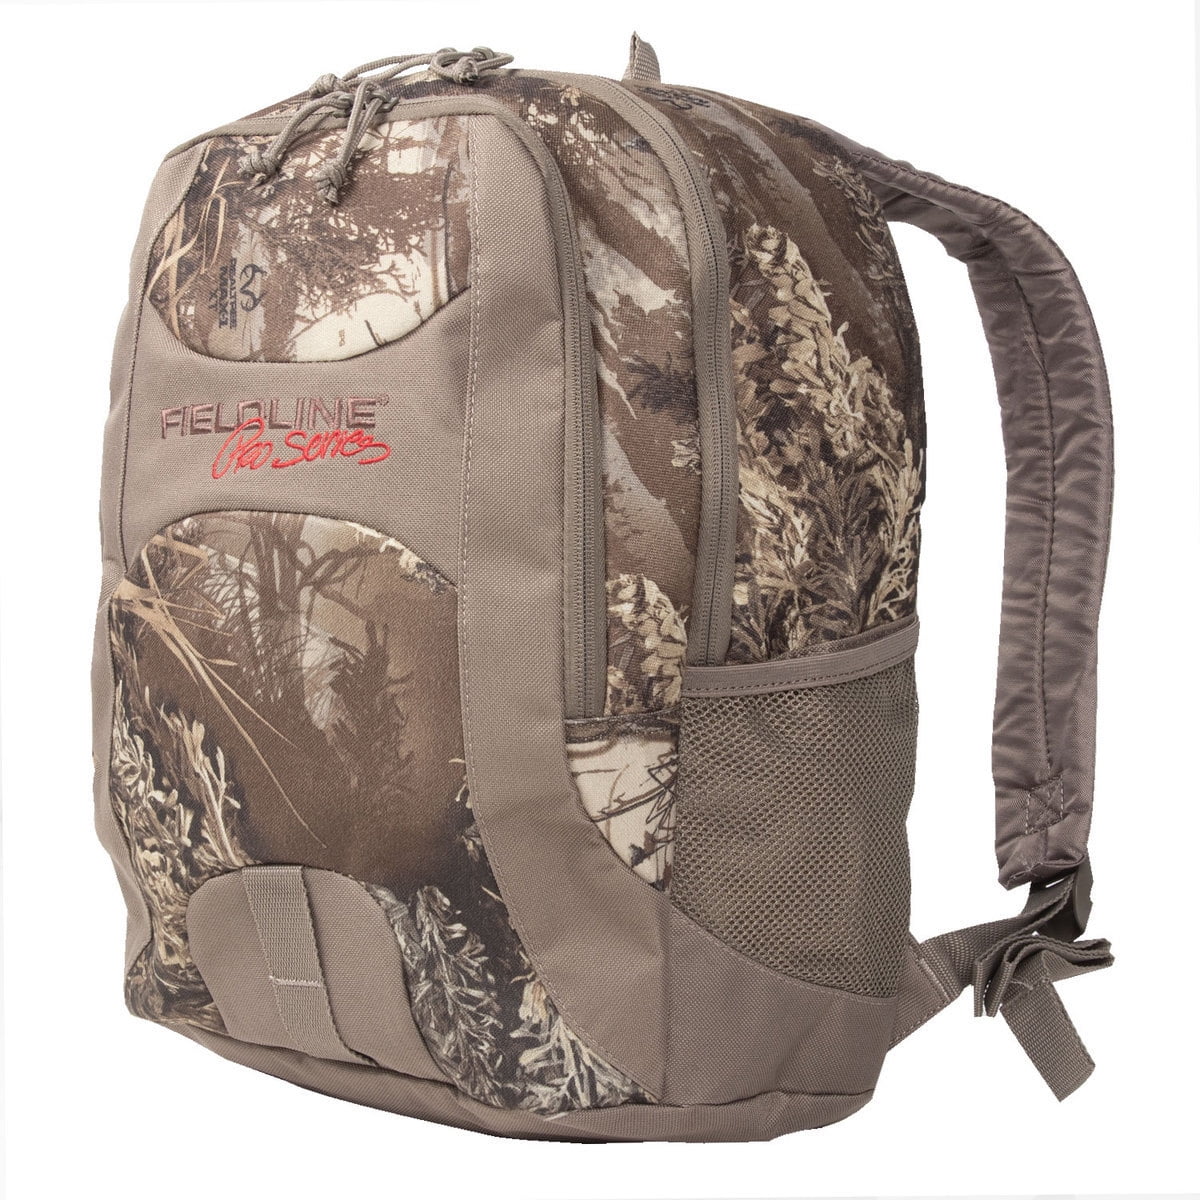 Back Country Fieldline Pro Series Matador 29 Liter Camo Hunting Gear Backpack 